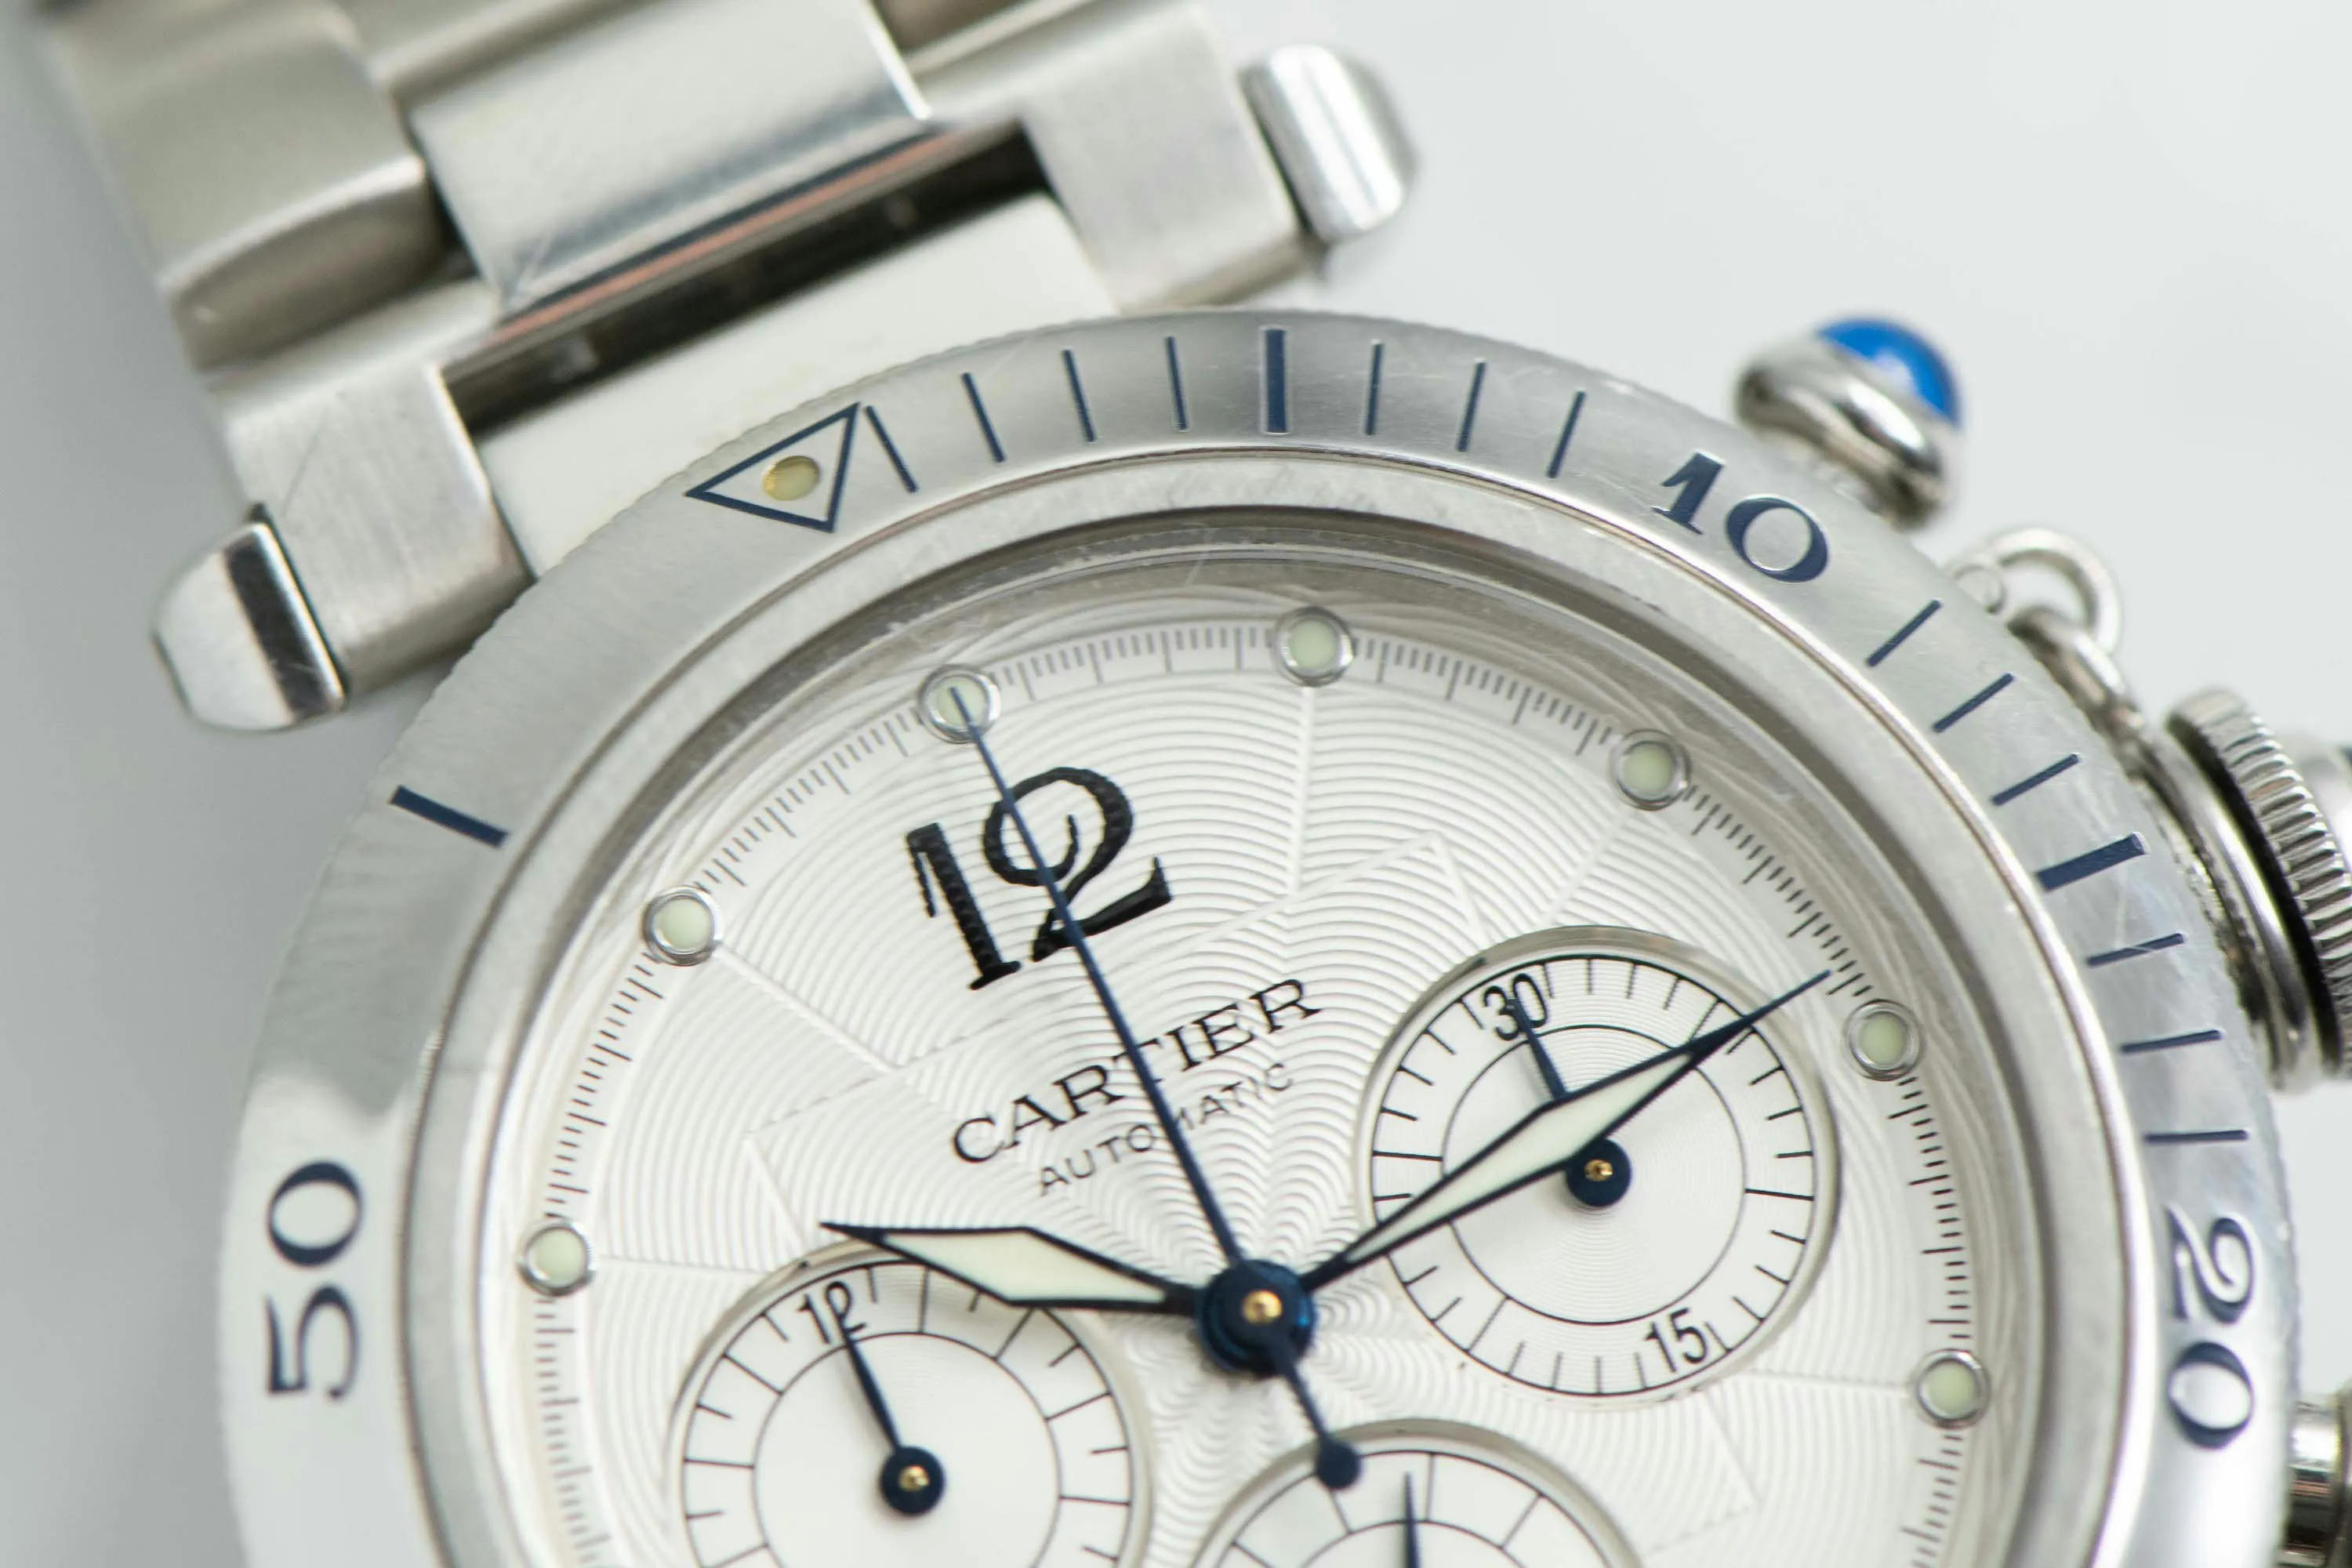 Cartier Pasha Seatimer w31030H3 38mm Stainless steel Silver 3